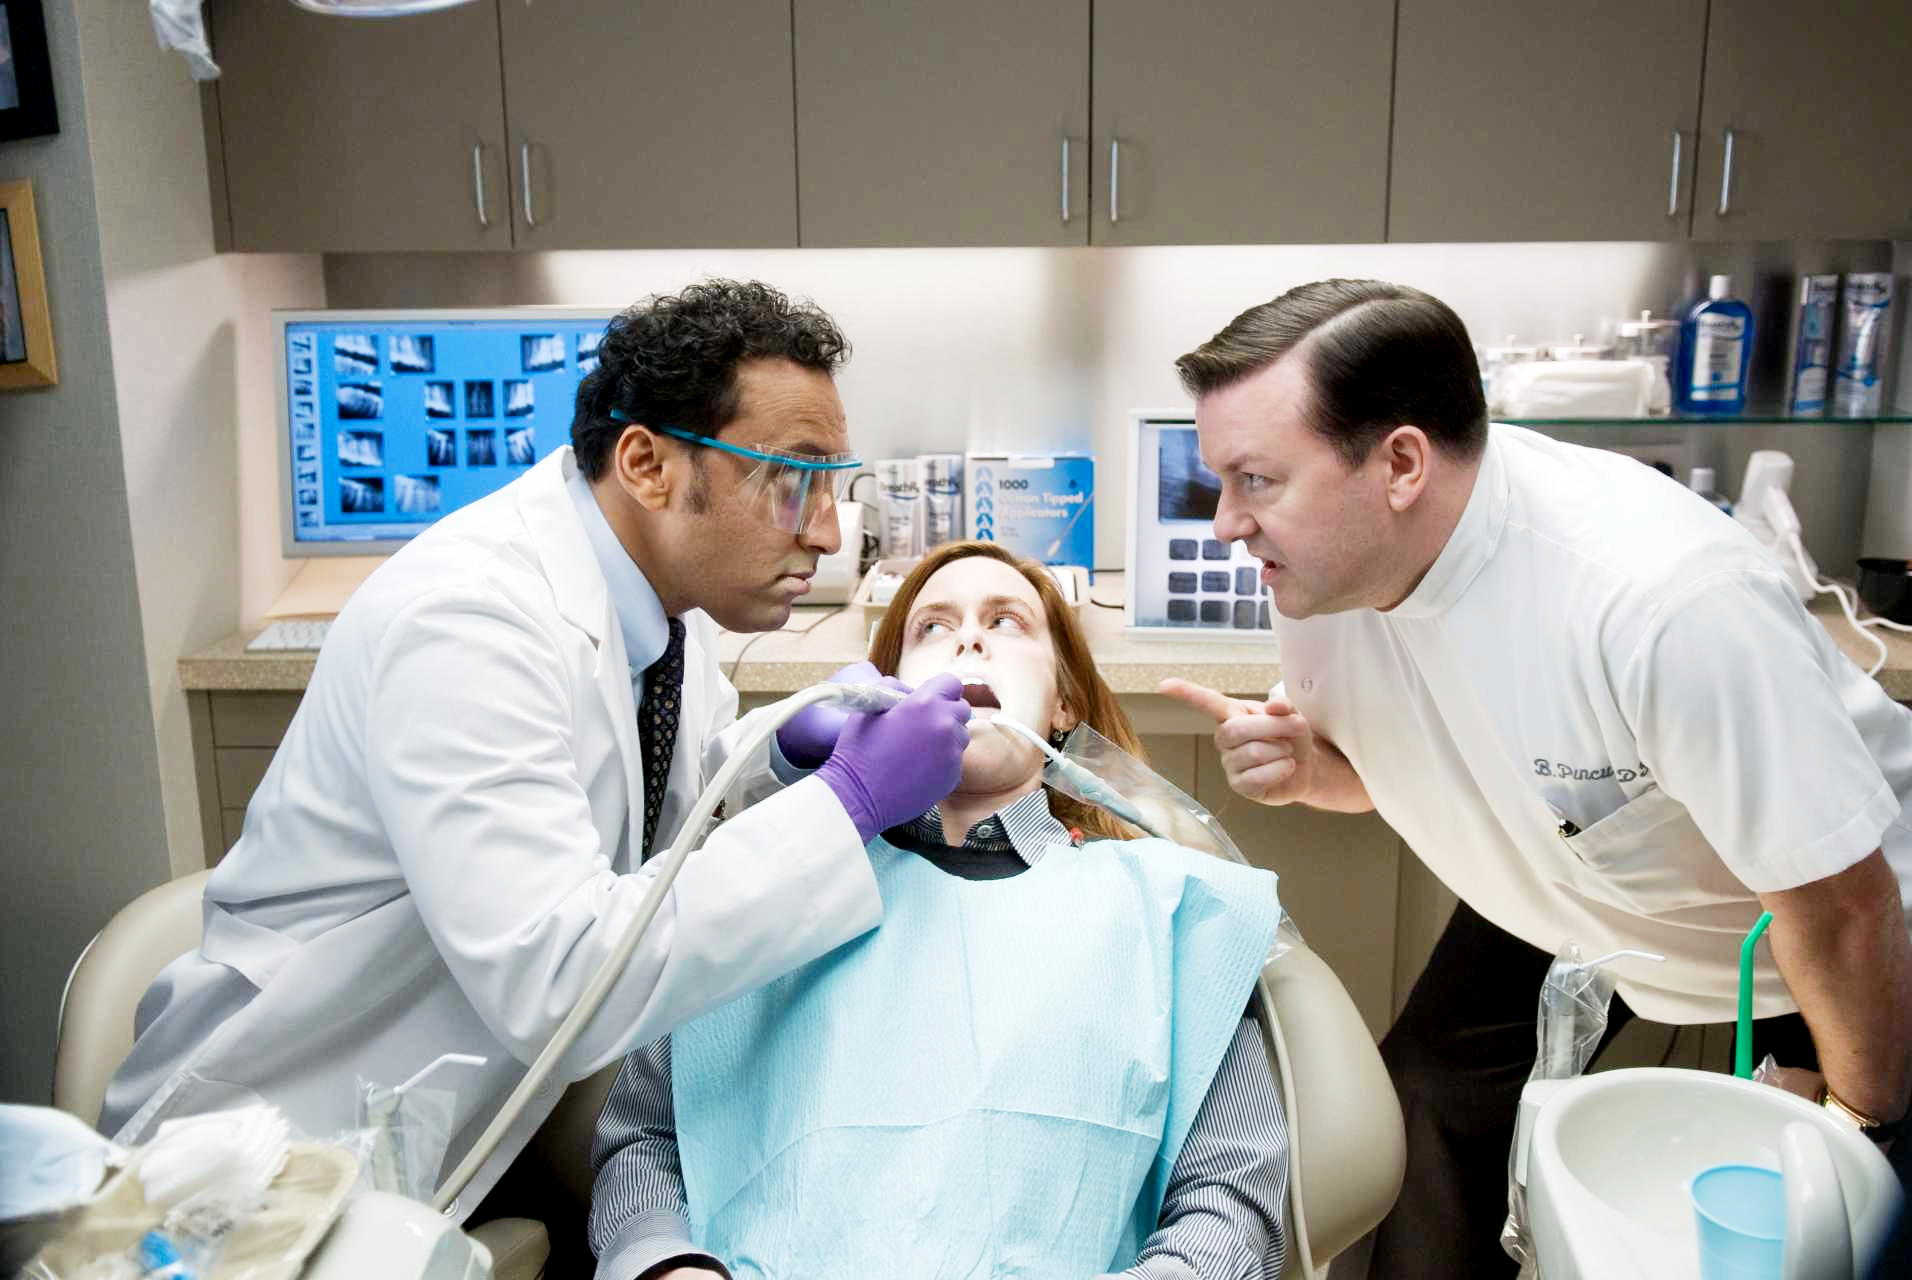 Aasif Mandvi stars as Dr. Prashar and Ricky Gervais stars as Bertram Pincus in Paramount Pictures' Ghost Town (2008)